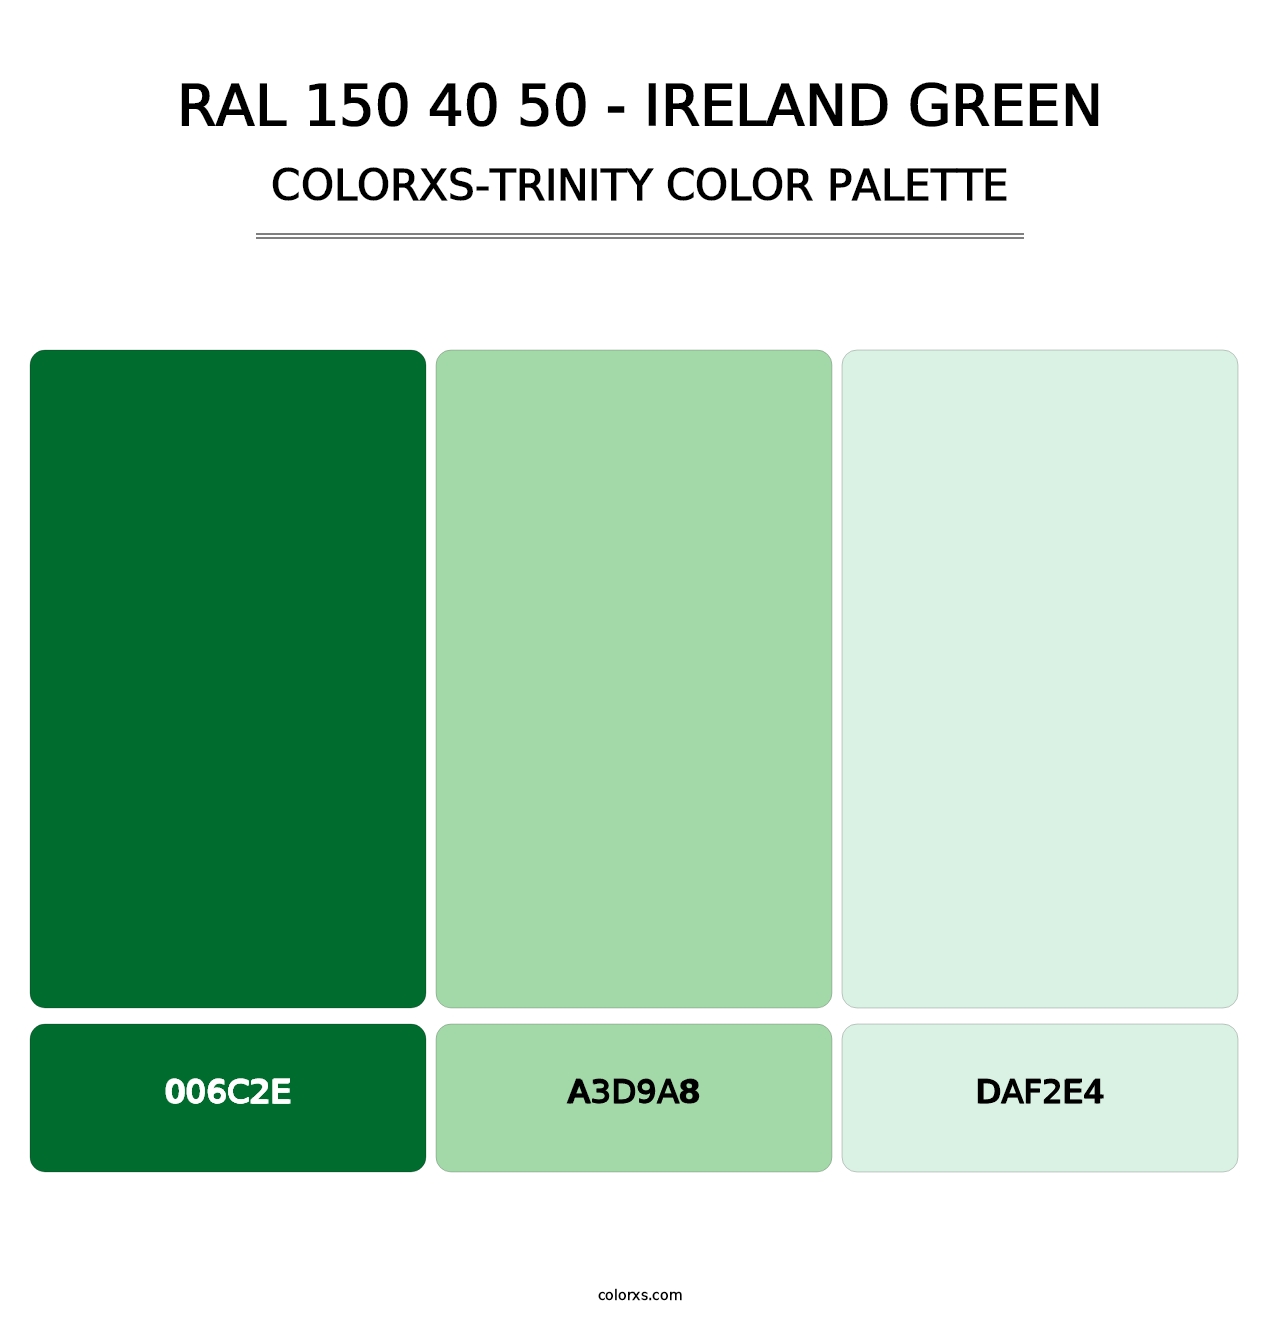 RAL 150 40 50 - Ireland Green - Colorxs Trinity Palette